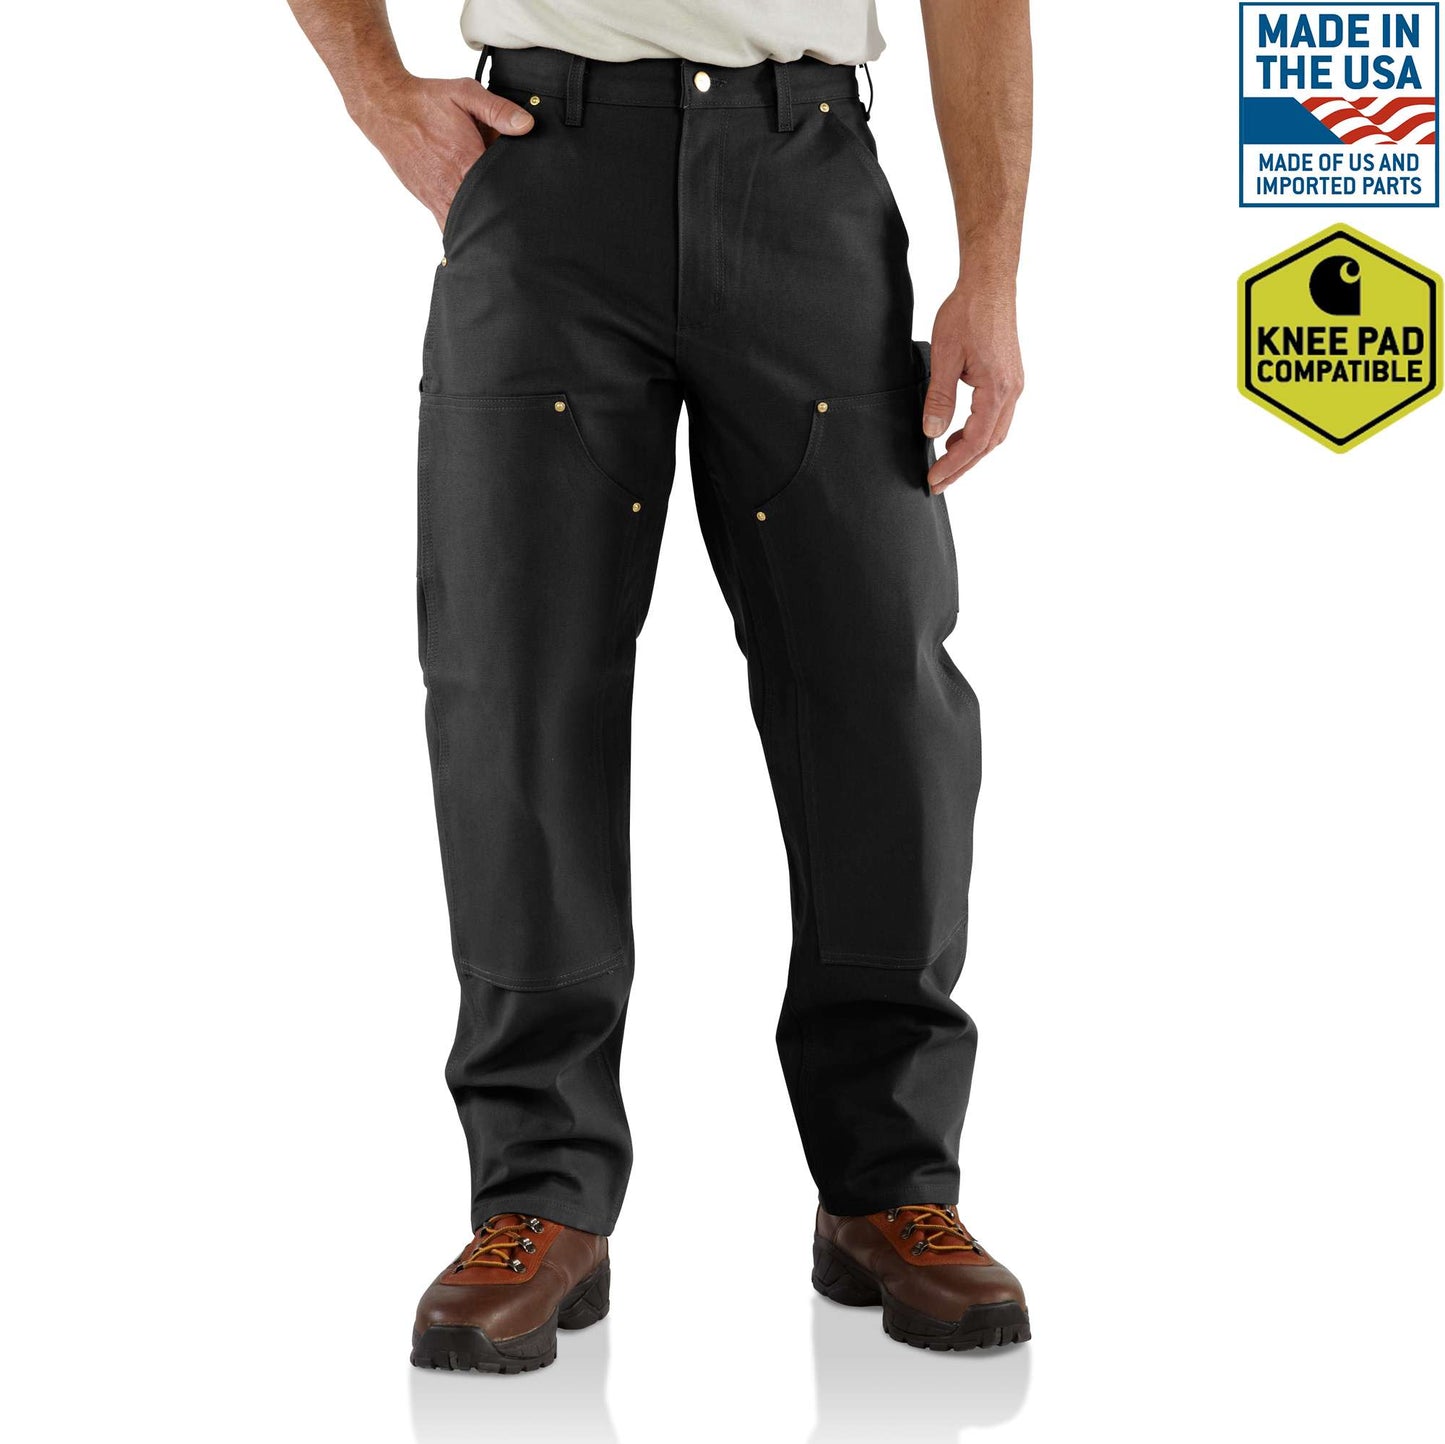  Carhartt Men's Firm Duck Double-Front Work Dungaree Pant B01,  Brown, 28W x 30L: Casual Pants: Clothing, Shoes & Jewelry